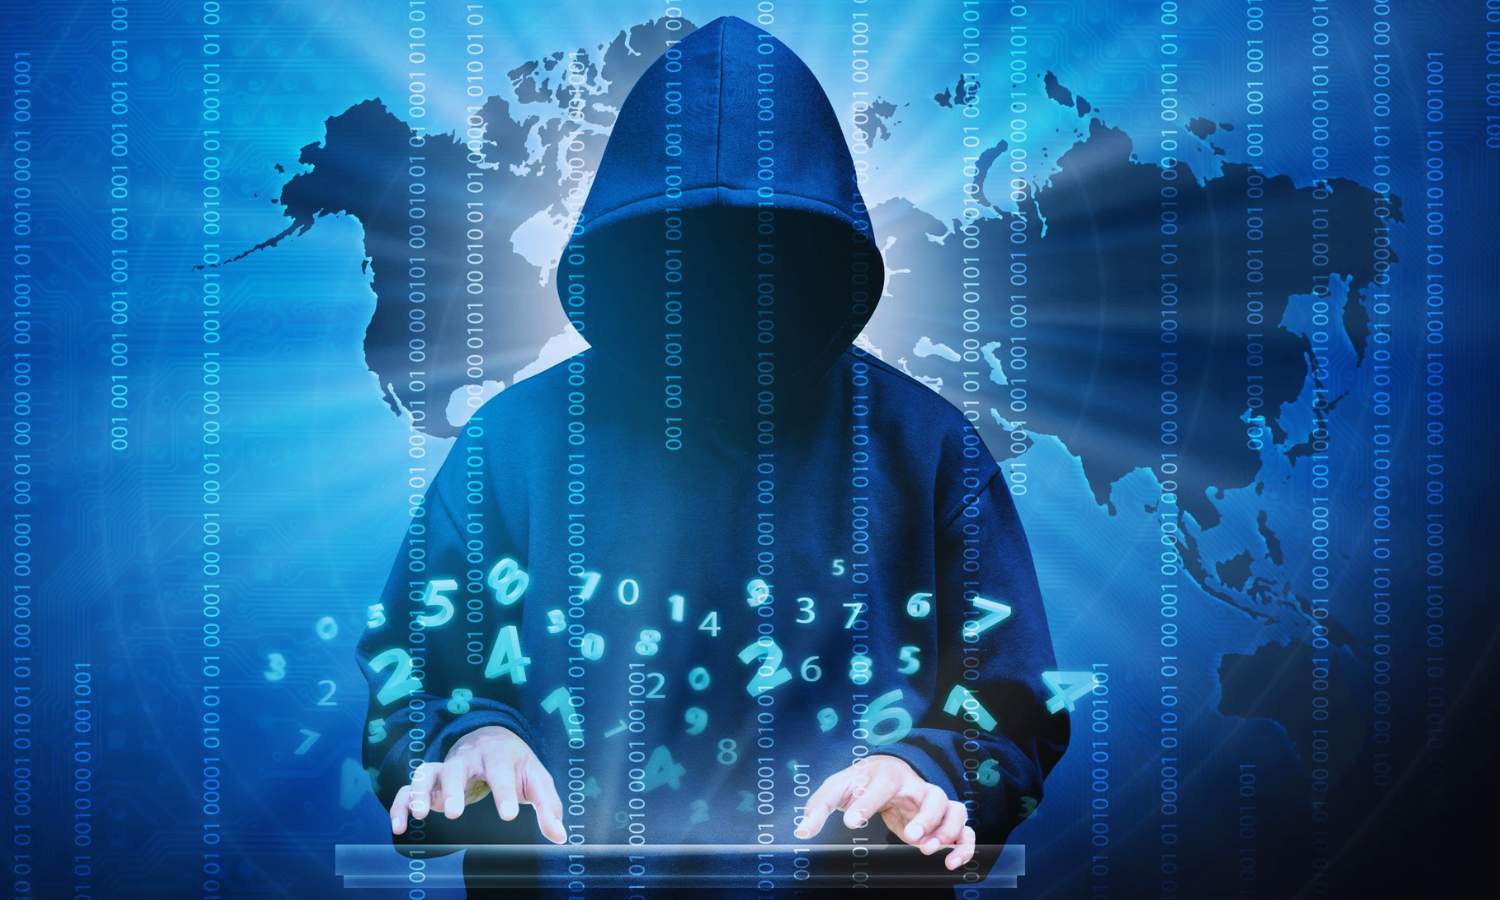 Jharkhand's Cybercrime Control: Insights from NCRB Data on Dacoity and Fraud Cases